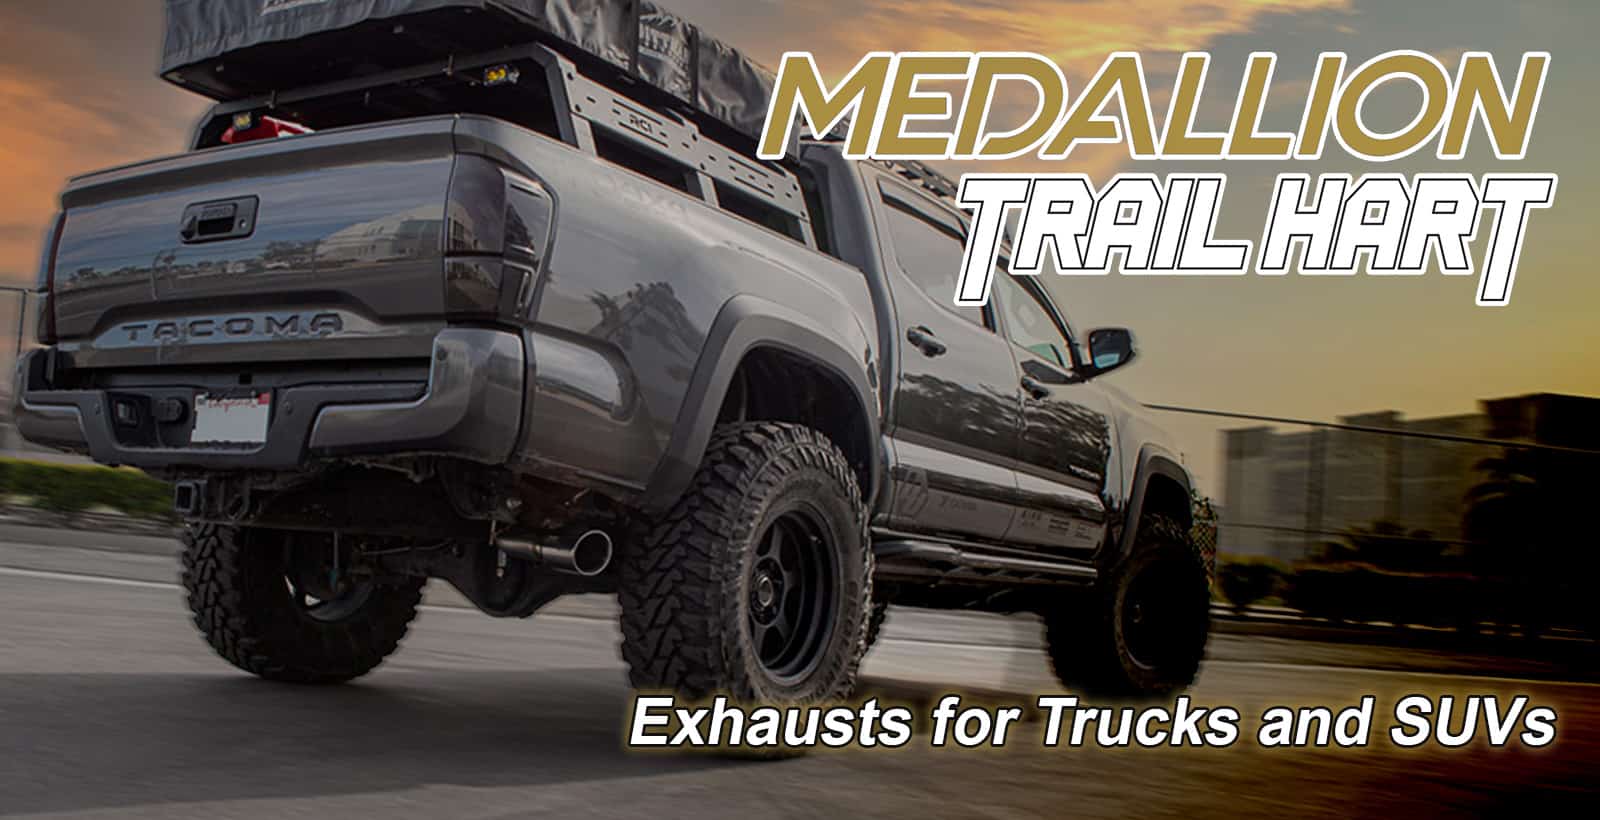 Medallion Trail Hart - Exhausts for Trucks and SUVs